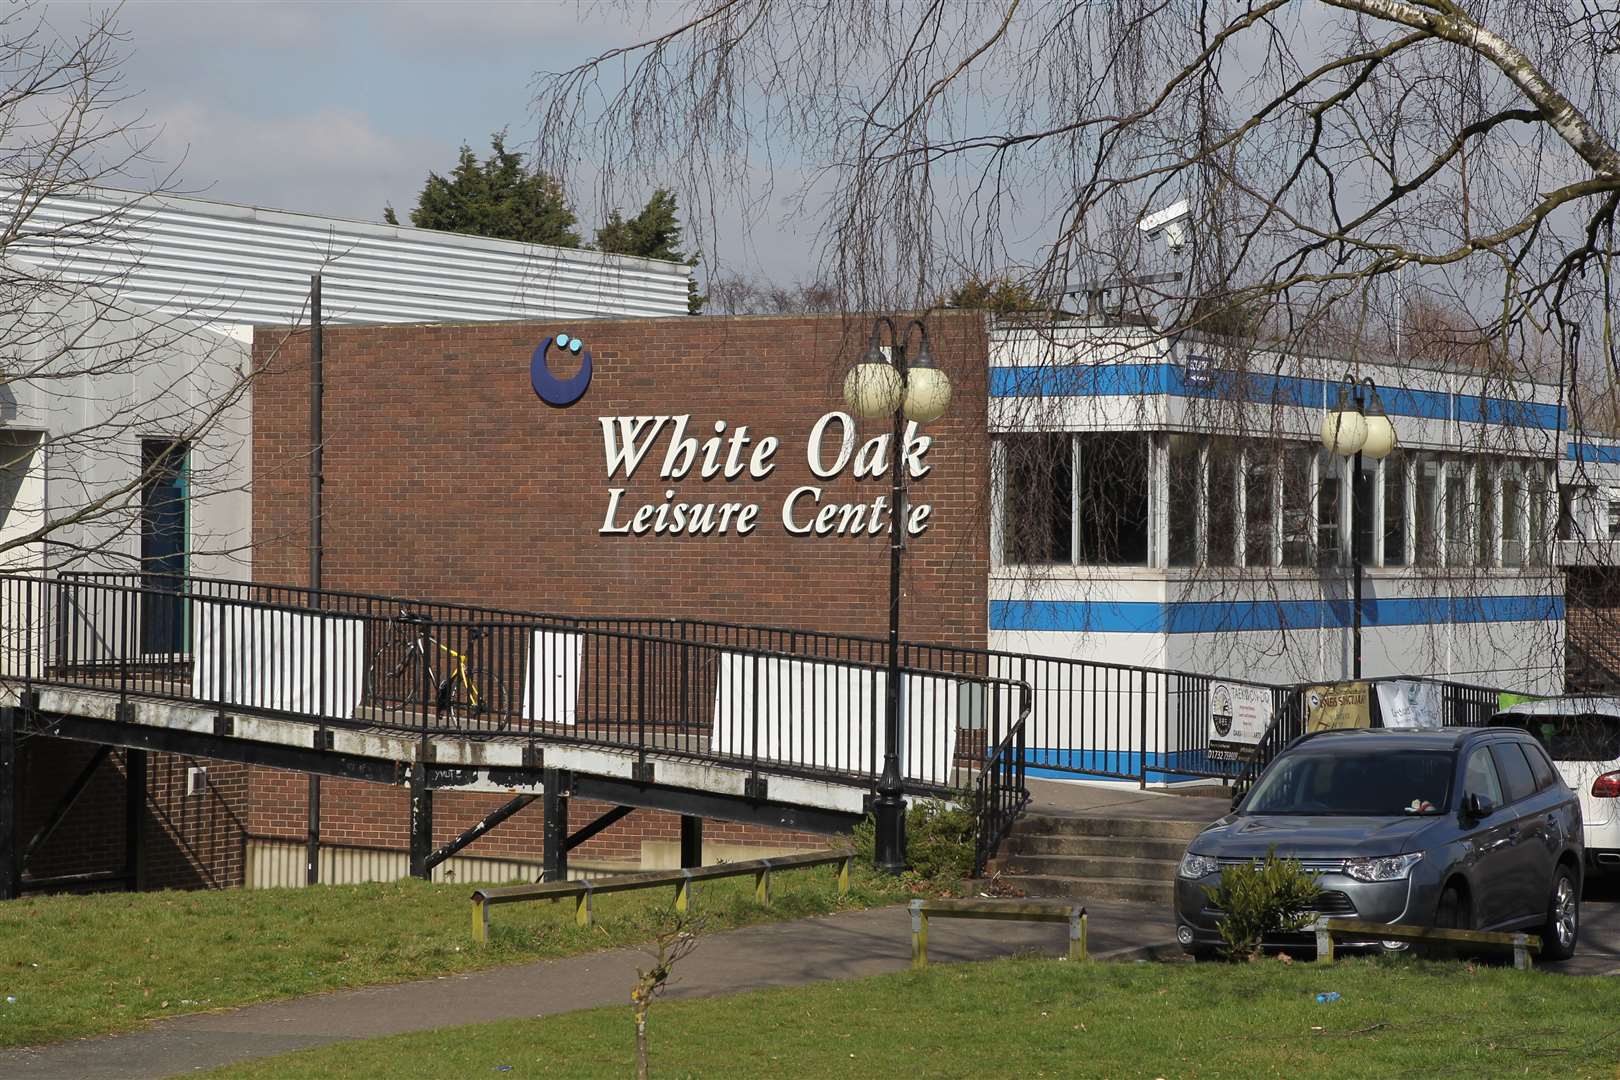 The existing facilities at White Oak Leisure Centre in Swanley. Picture: John Westhrop